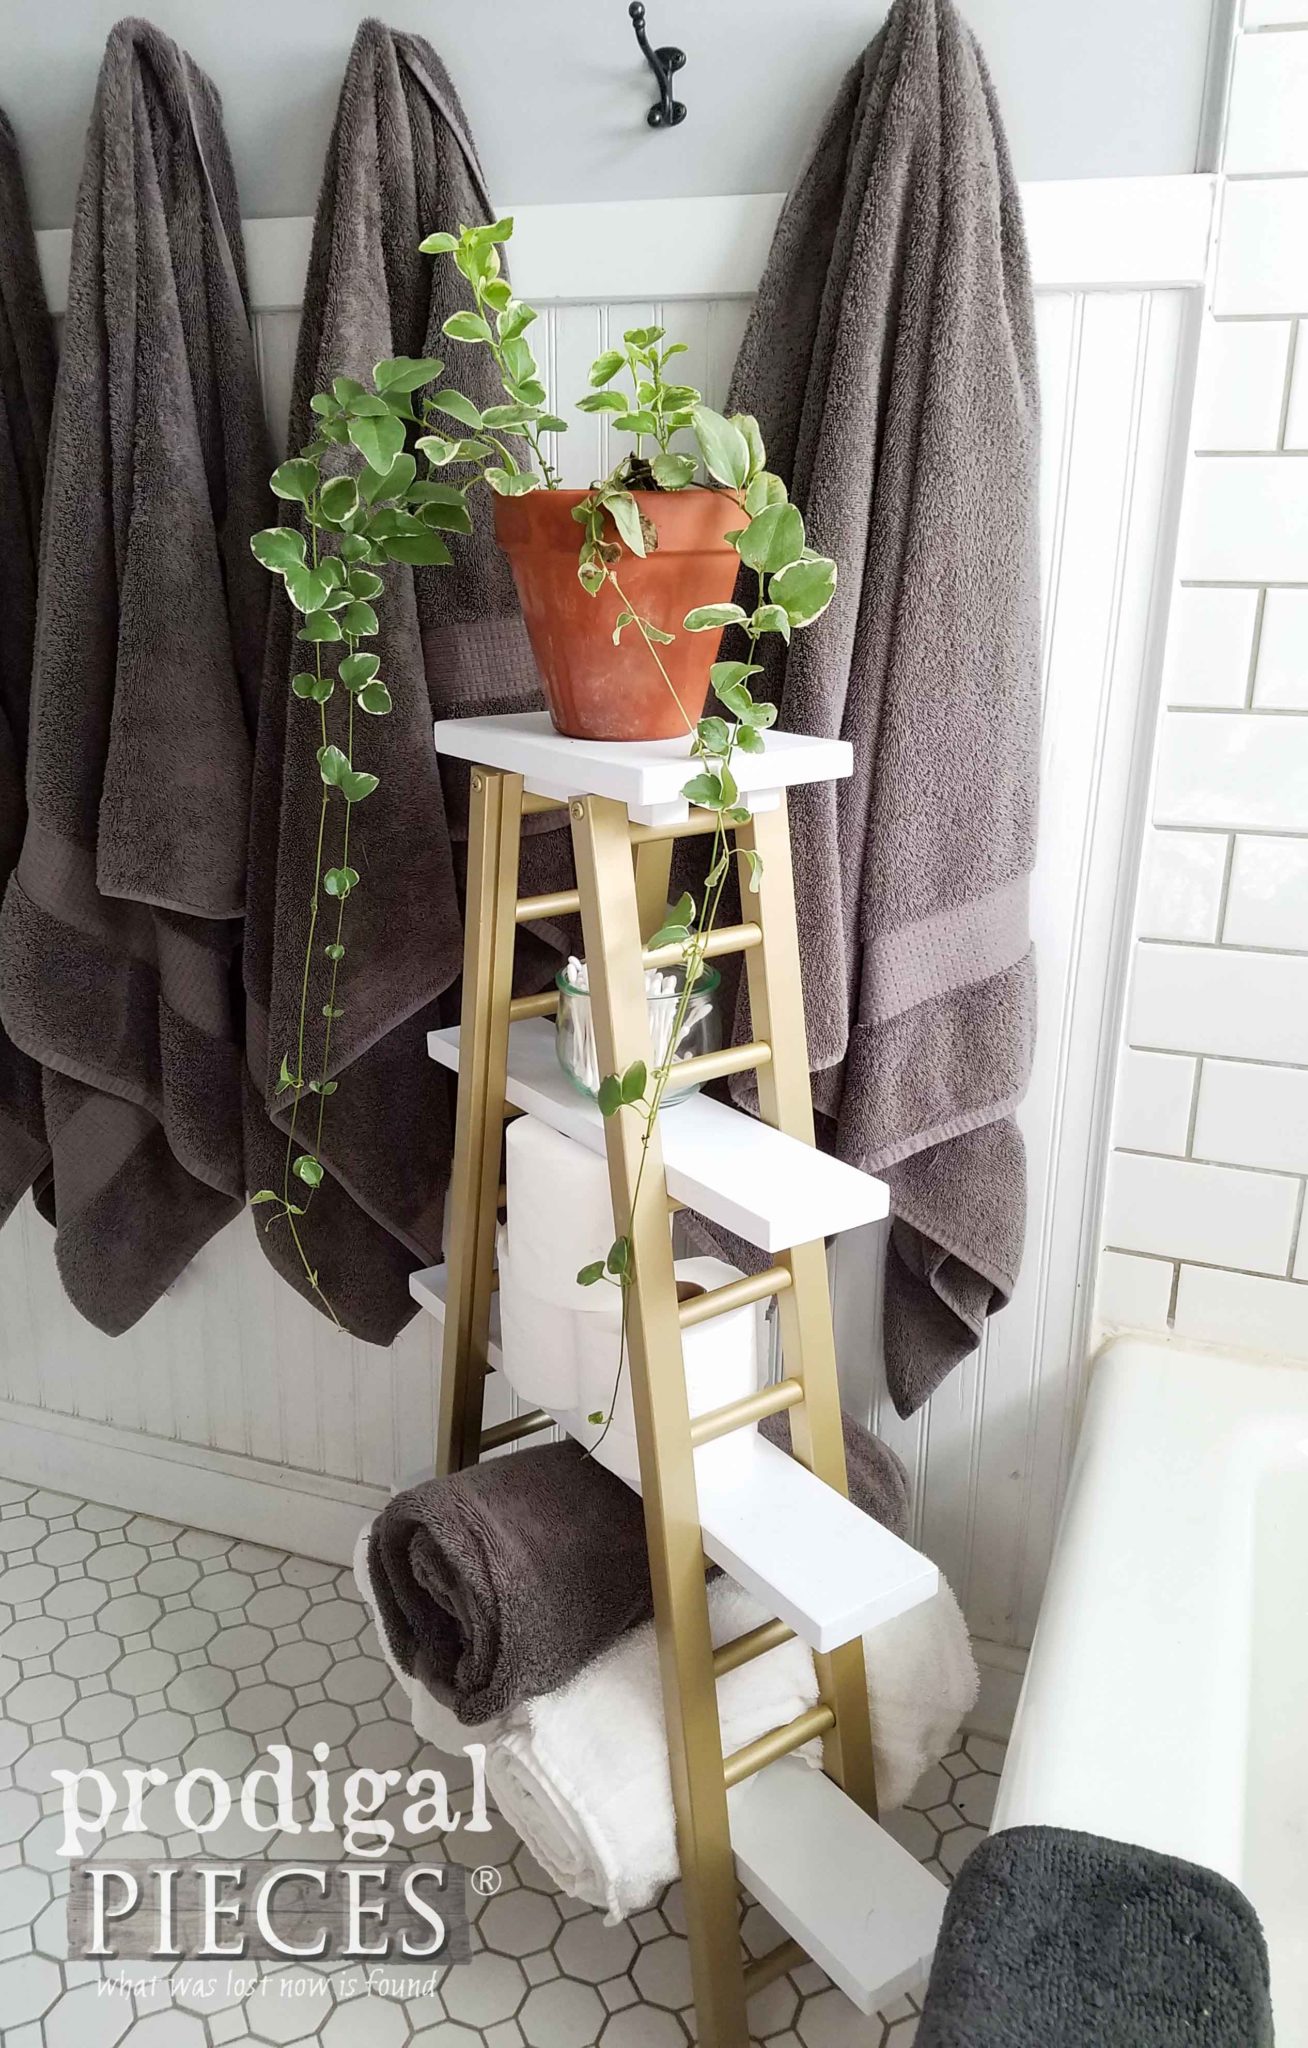 Bed Rails Turned Modern Chic Towel Rack for Upcycled Storage by Prodigal Pieces | prodigalpieces.com